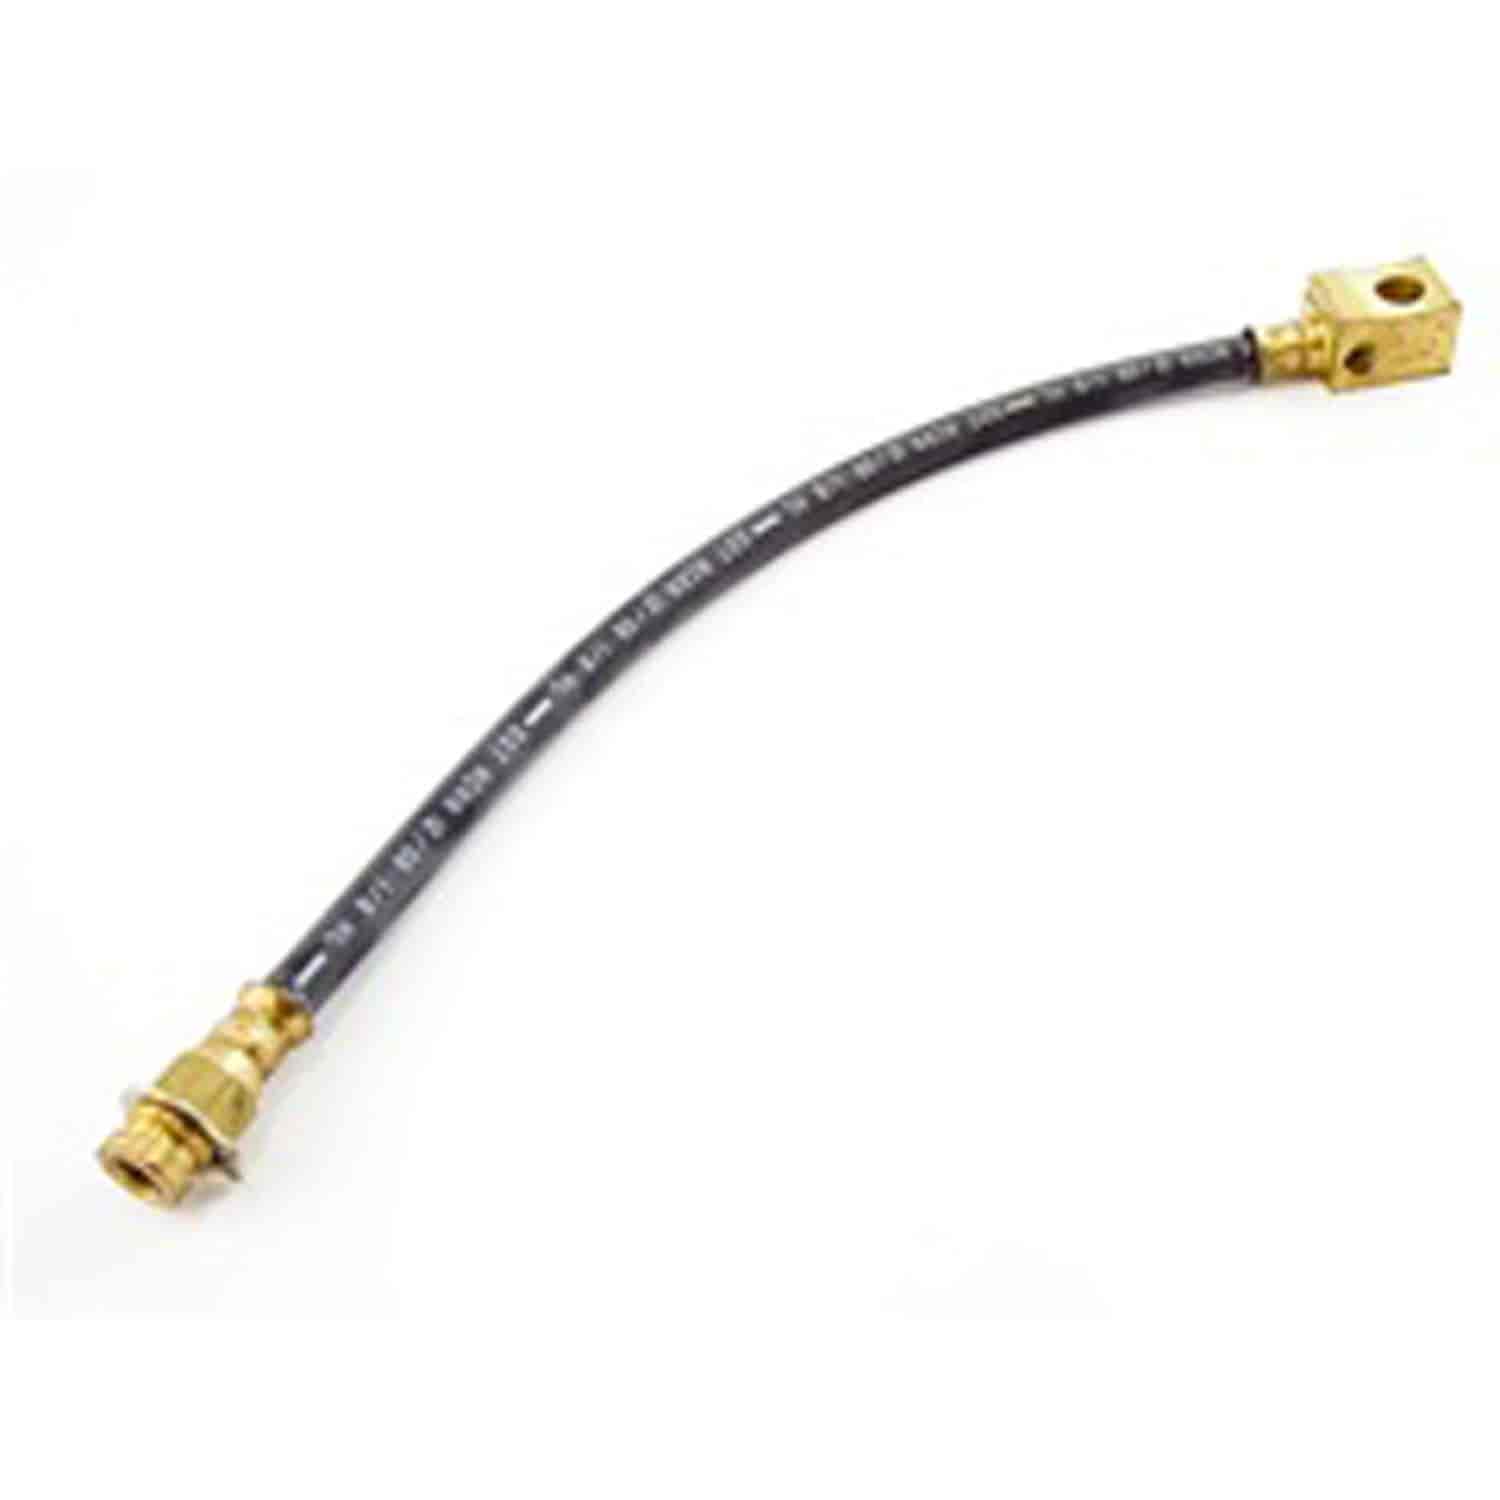 This rear center brake hose from Omix-ADA fits